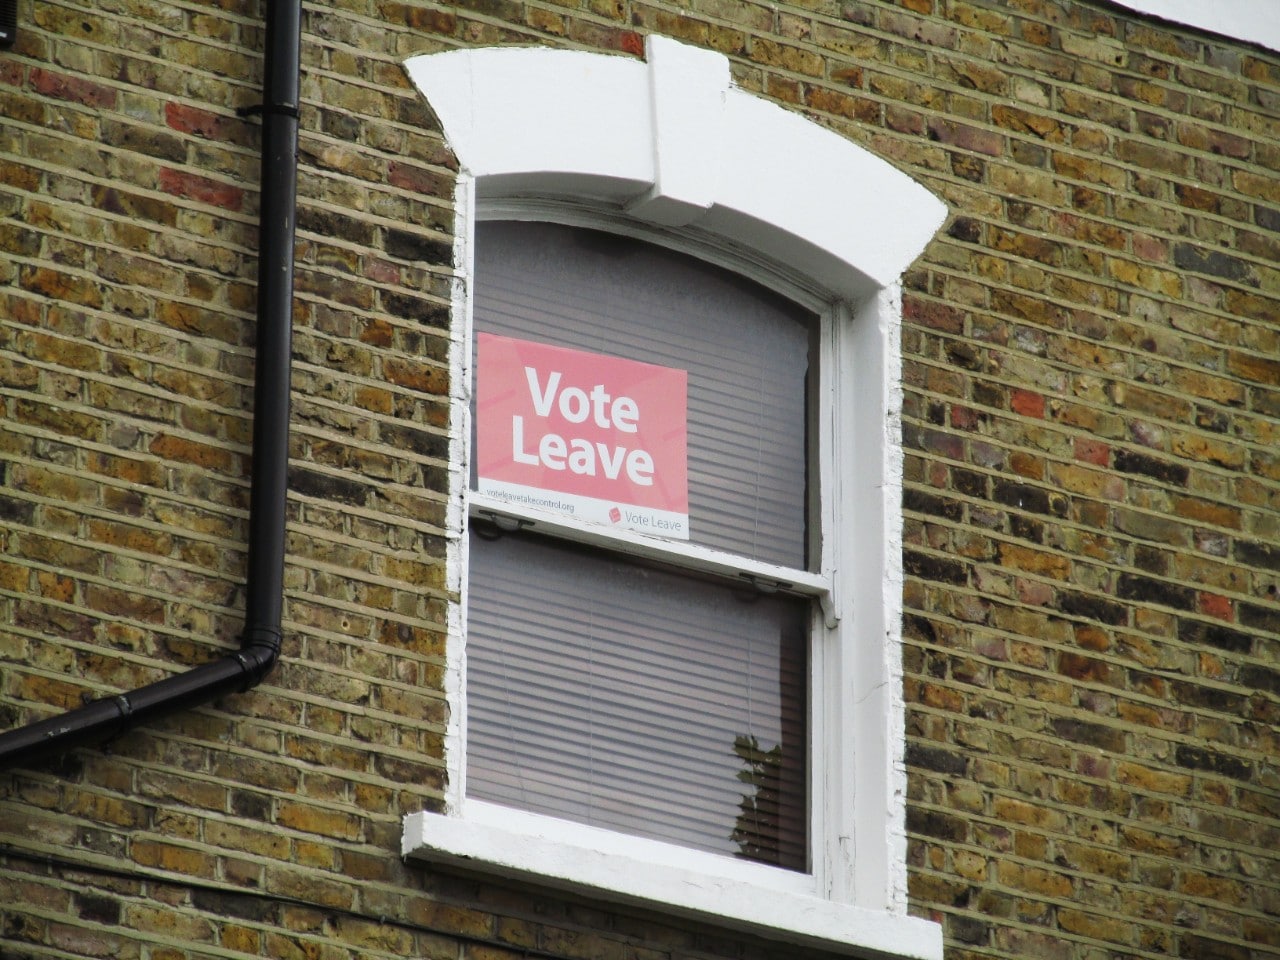 Brexit "Vote Leave" sign on display in London. Image: David Holt/Wikimedia Commons.